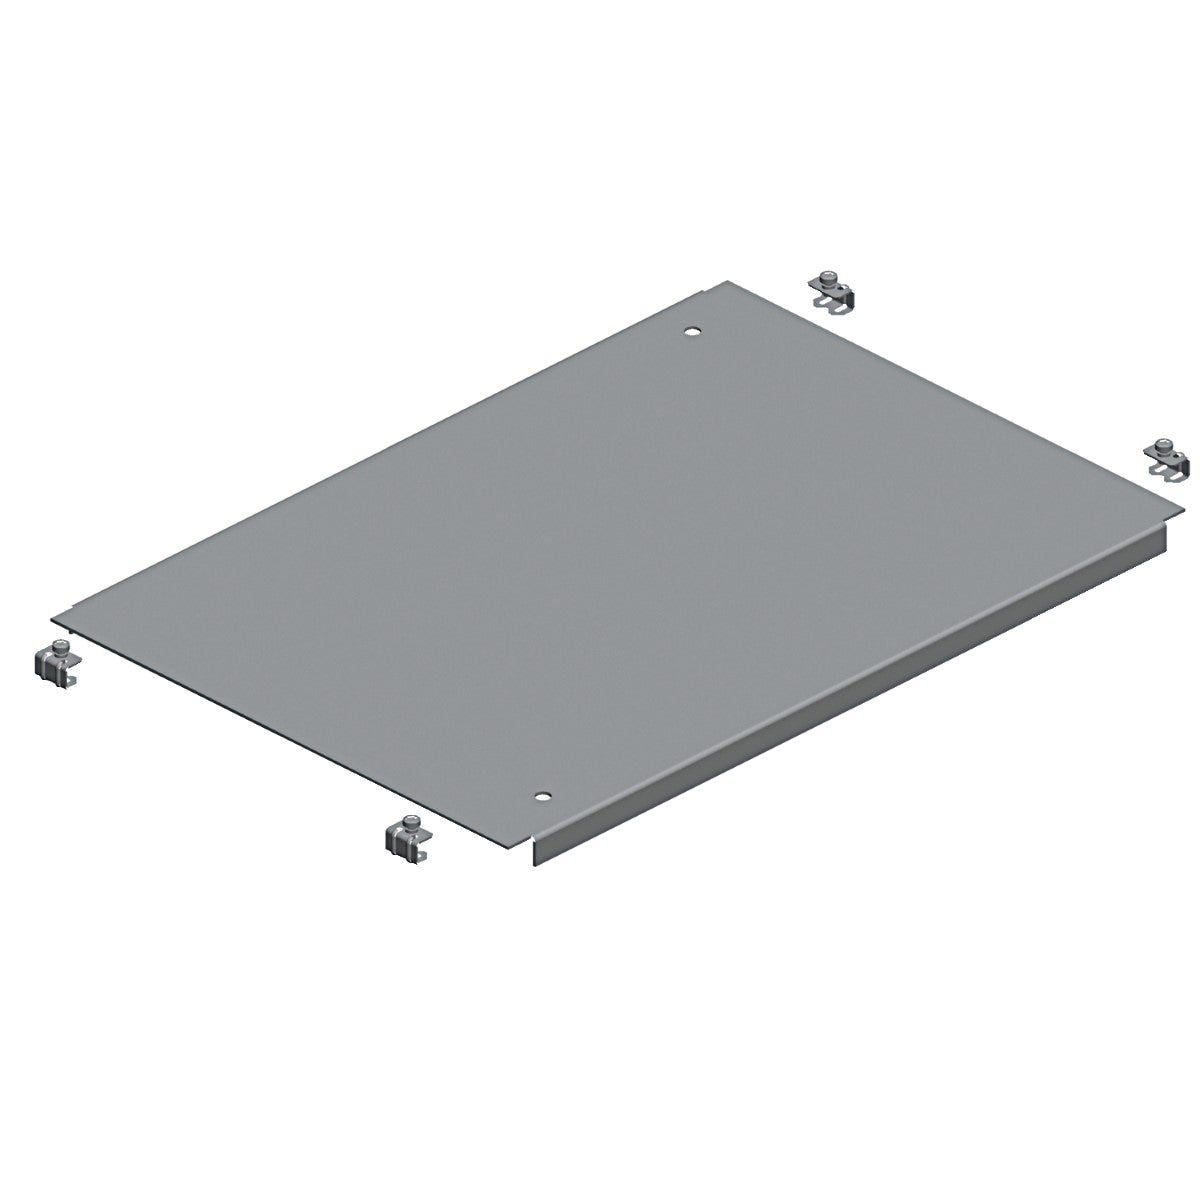 Spacial SF plain cable gland plate - fixed by clips - 800x600 mm